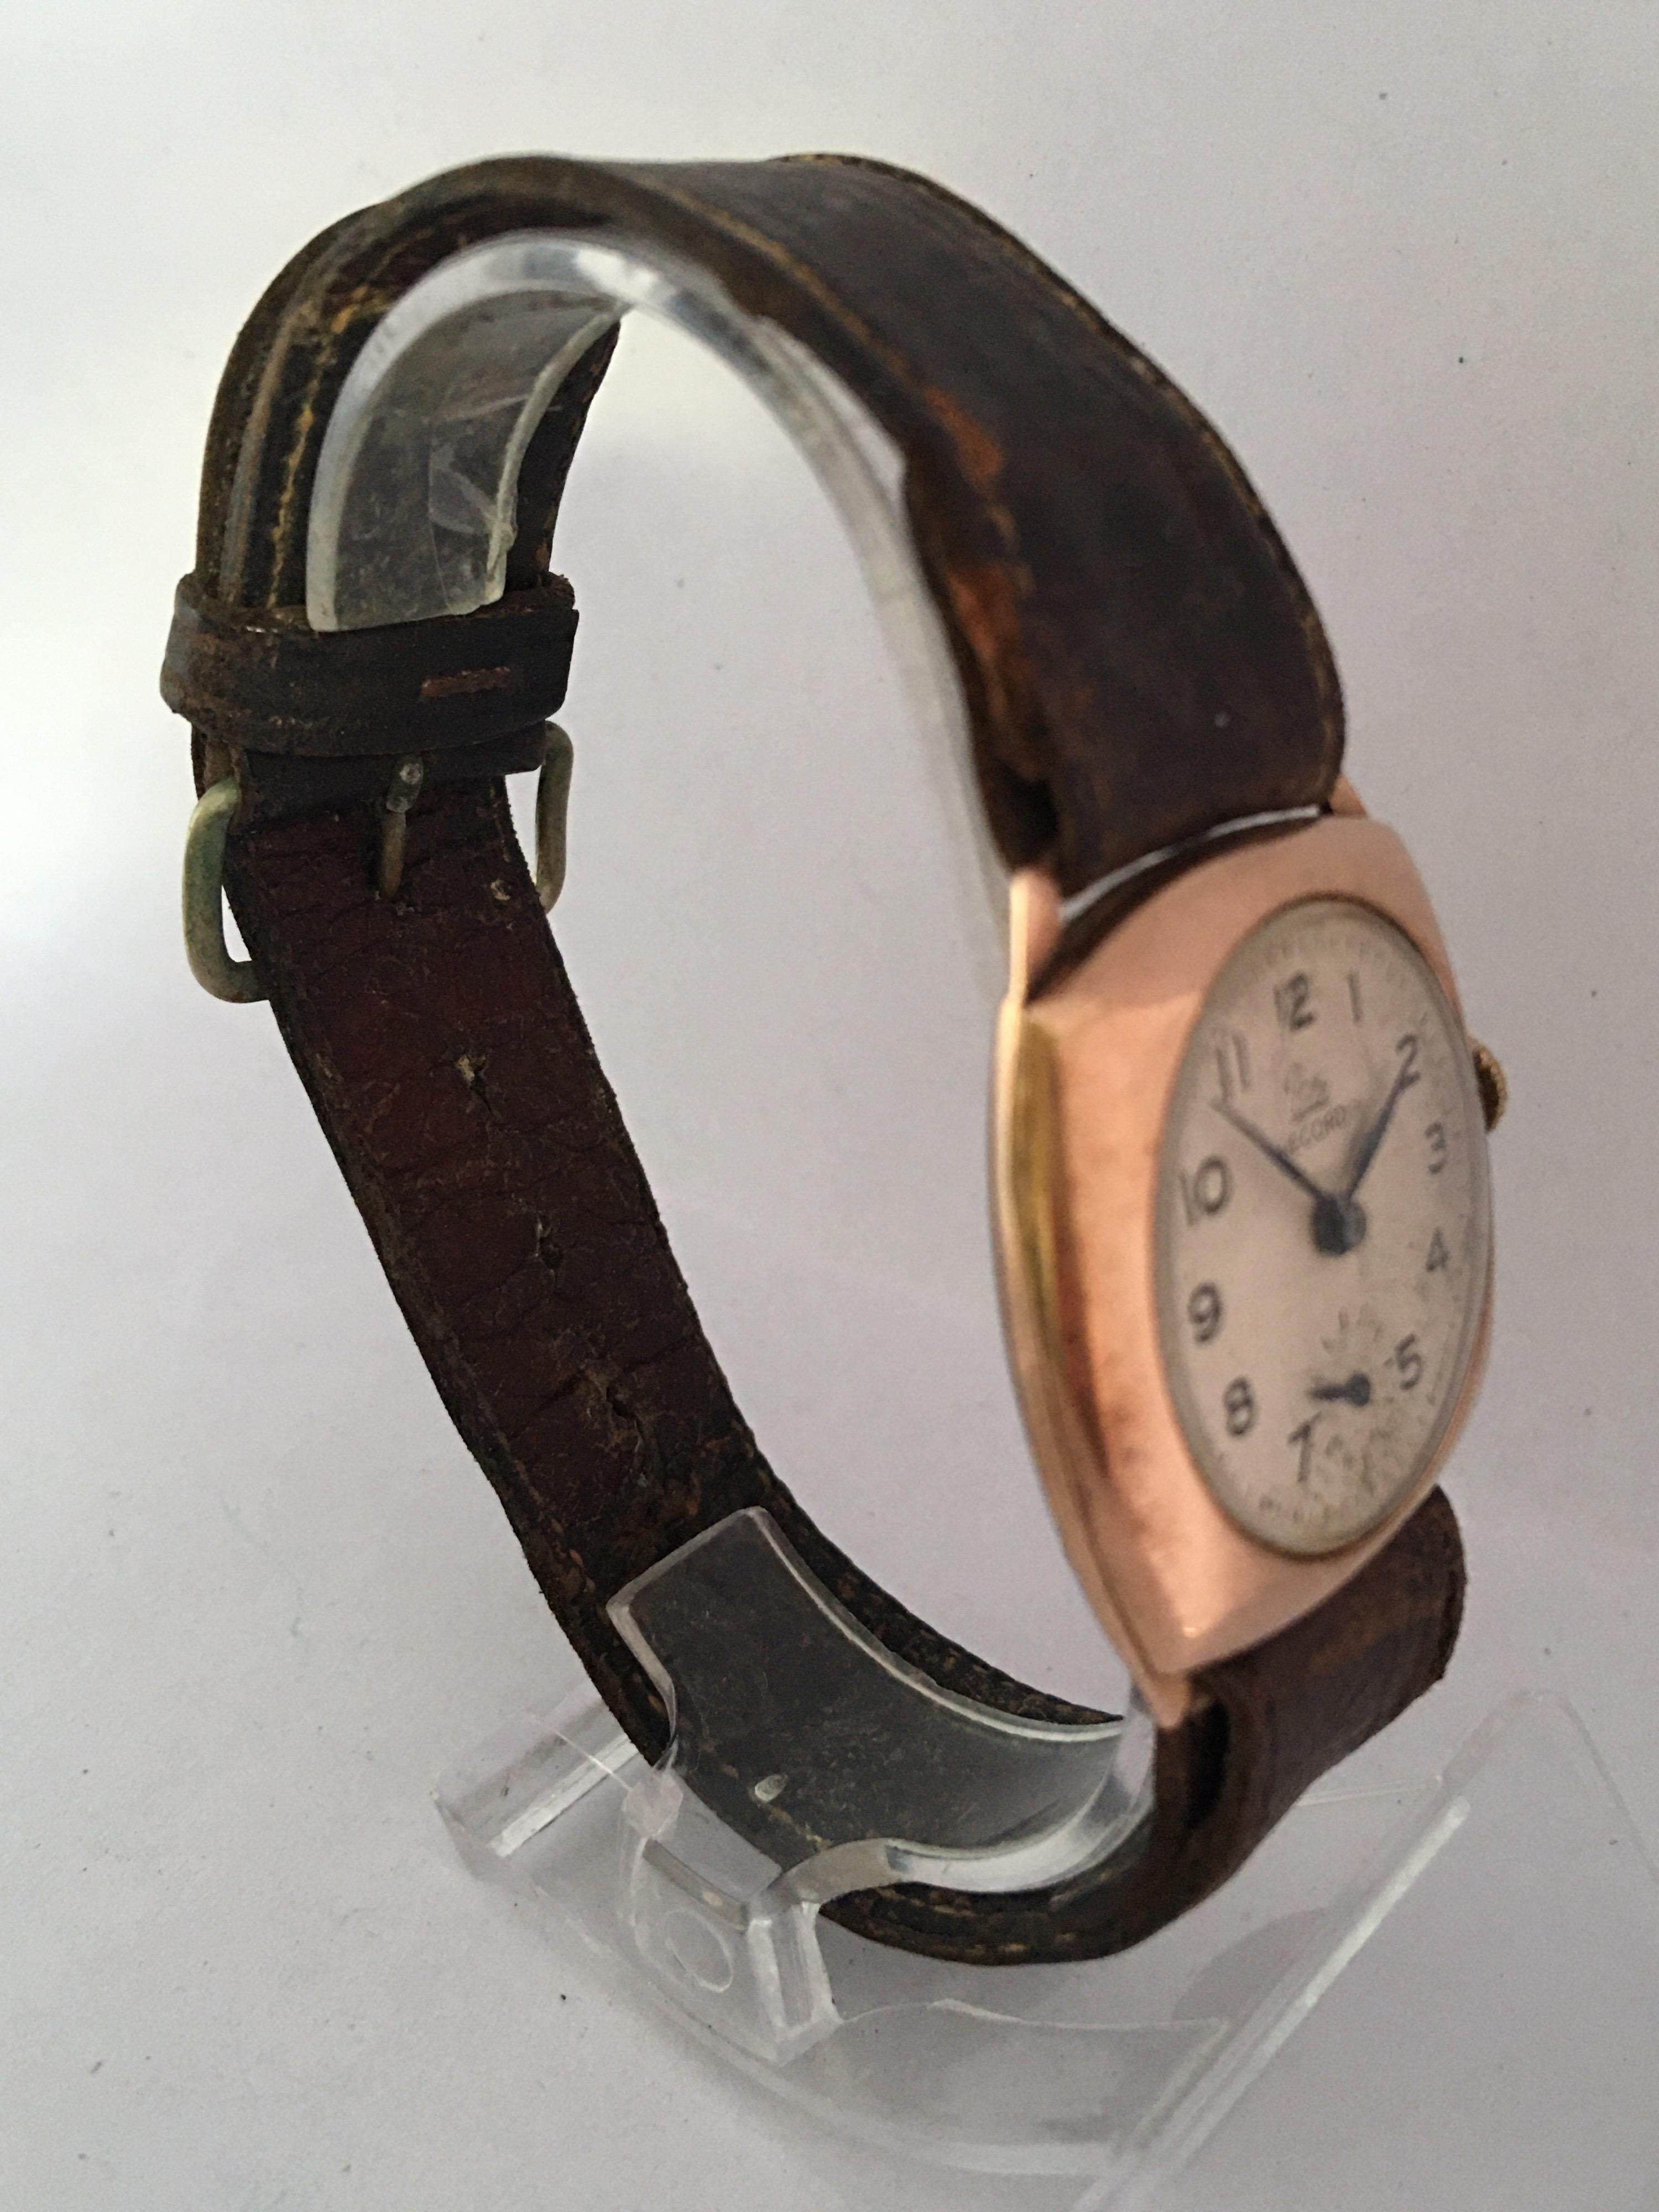 9 Karat Gold Vintage 1950s Récord Cushion Shaped Mechanical Watch In Good Condition For Sale In Carlisle, GB